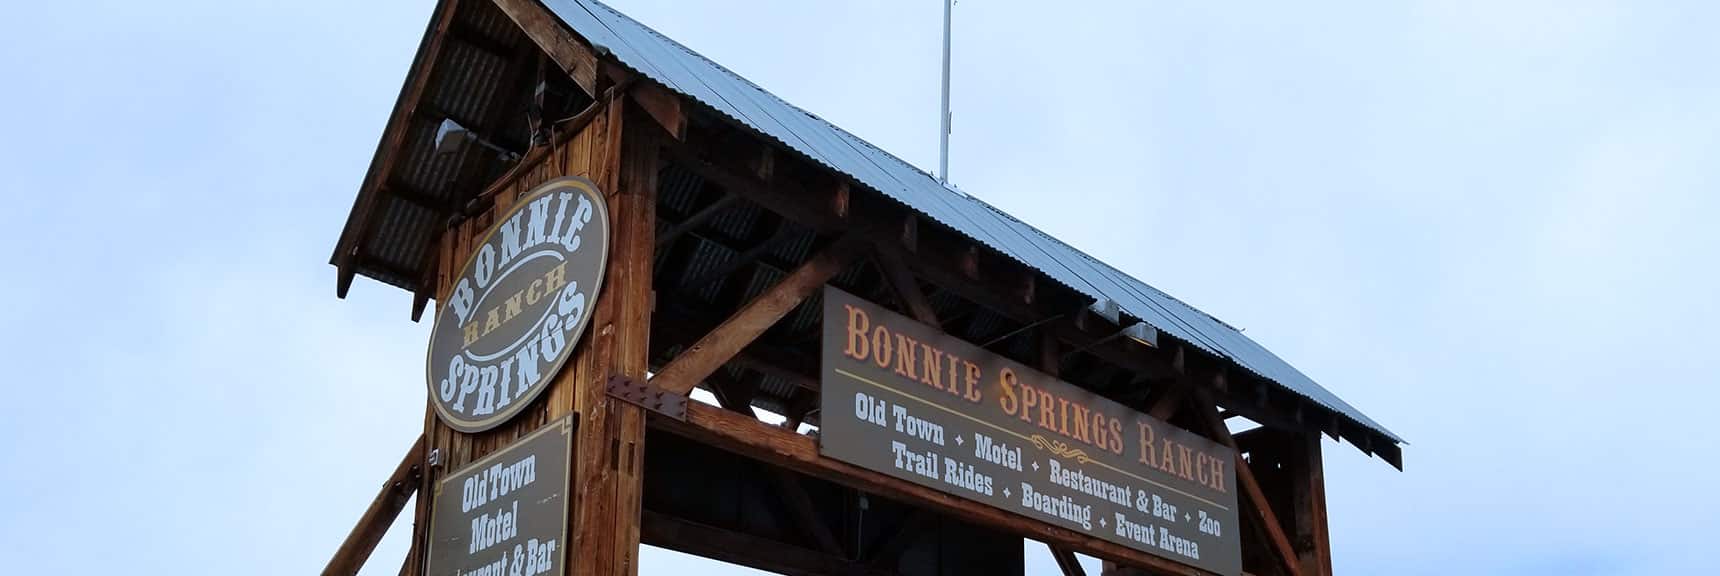 Bonnie Springs Ranch in Red Rock Canyon, Nevada